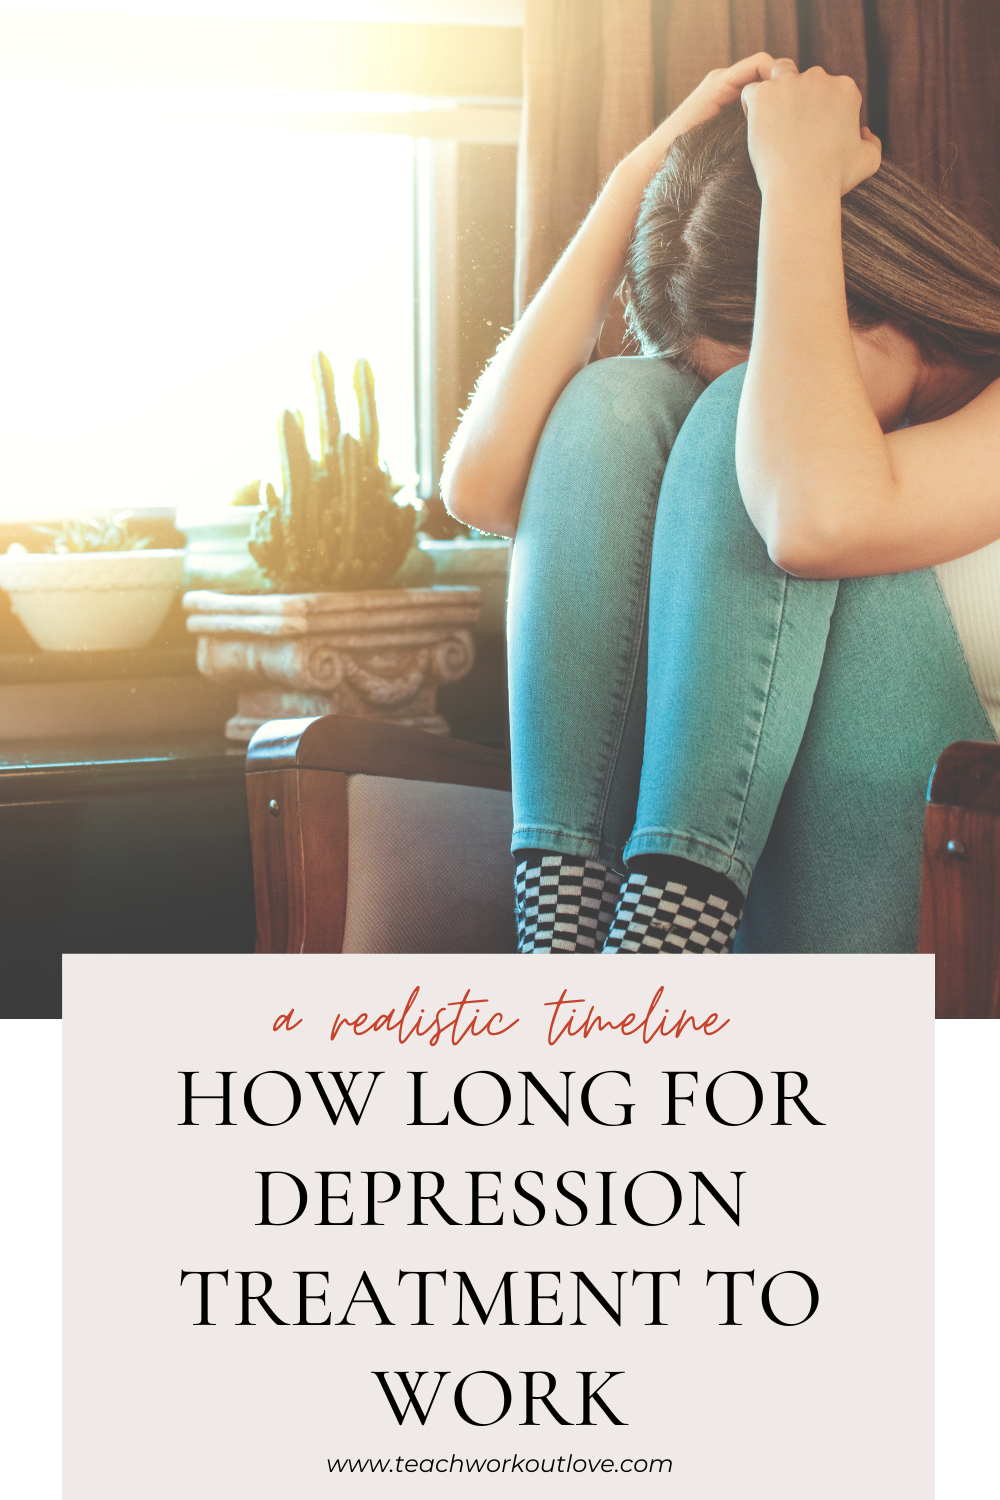 Depression treatment involves professional guidance and support to improve your mood and functioning. Here’s how long it can take to work.